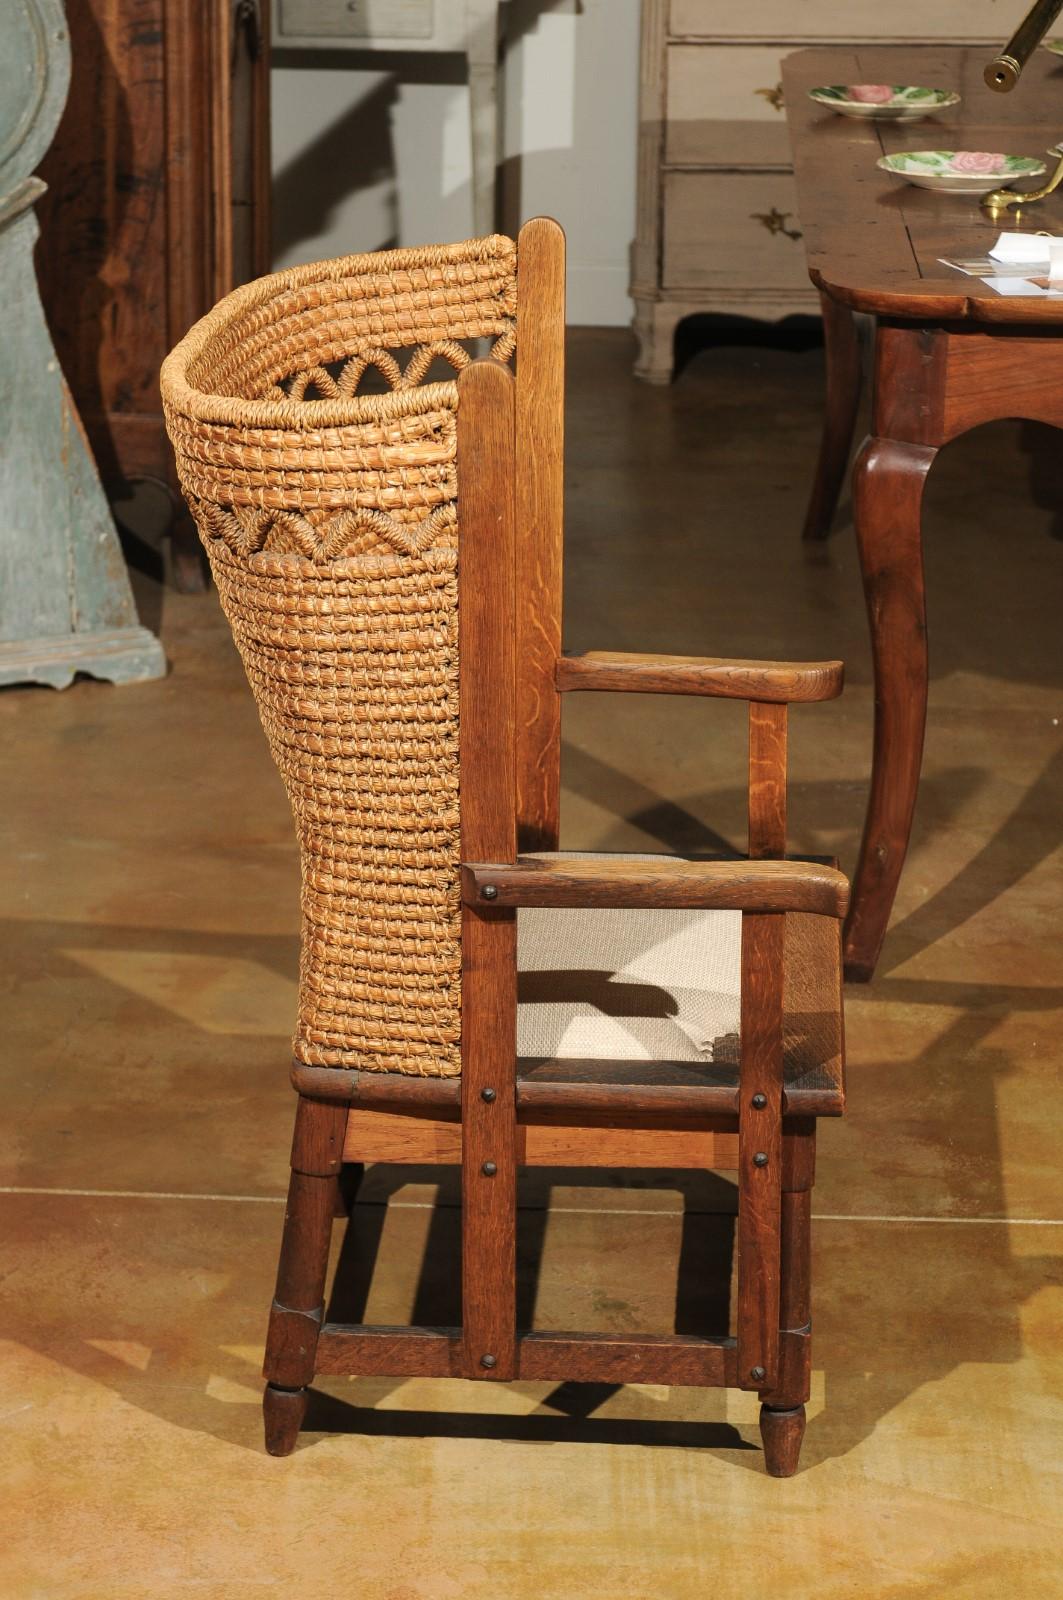 Rustic 19th Century Scottish Orkney Chair with Handwoven Straw Back and Zigzag Patterns